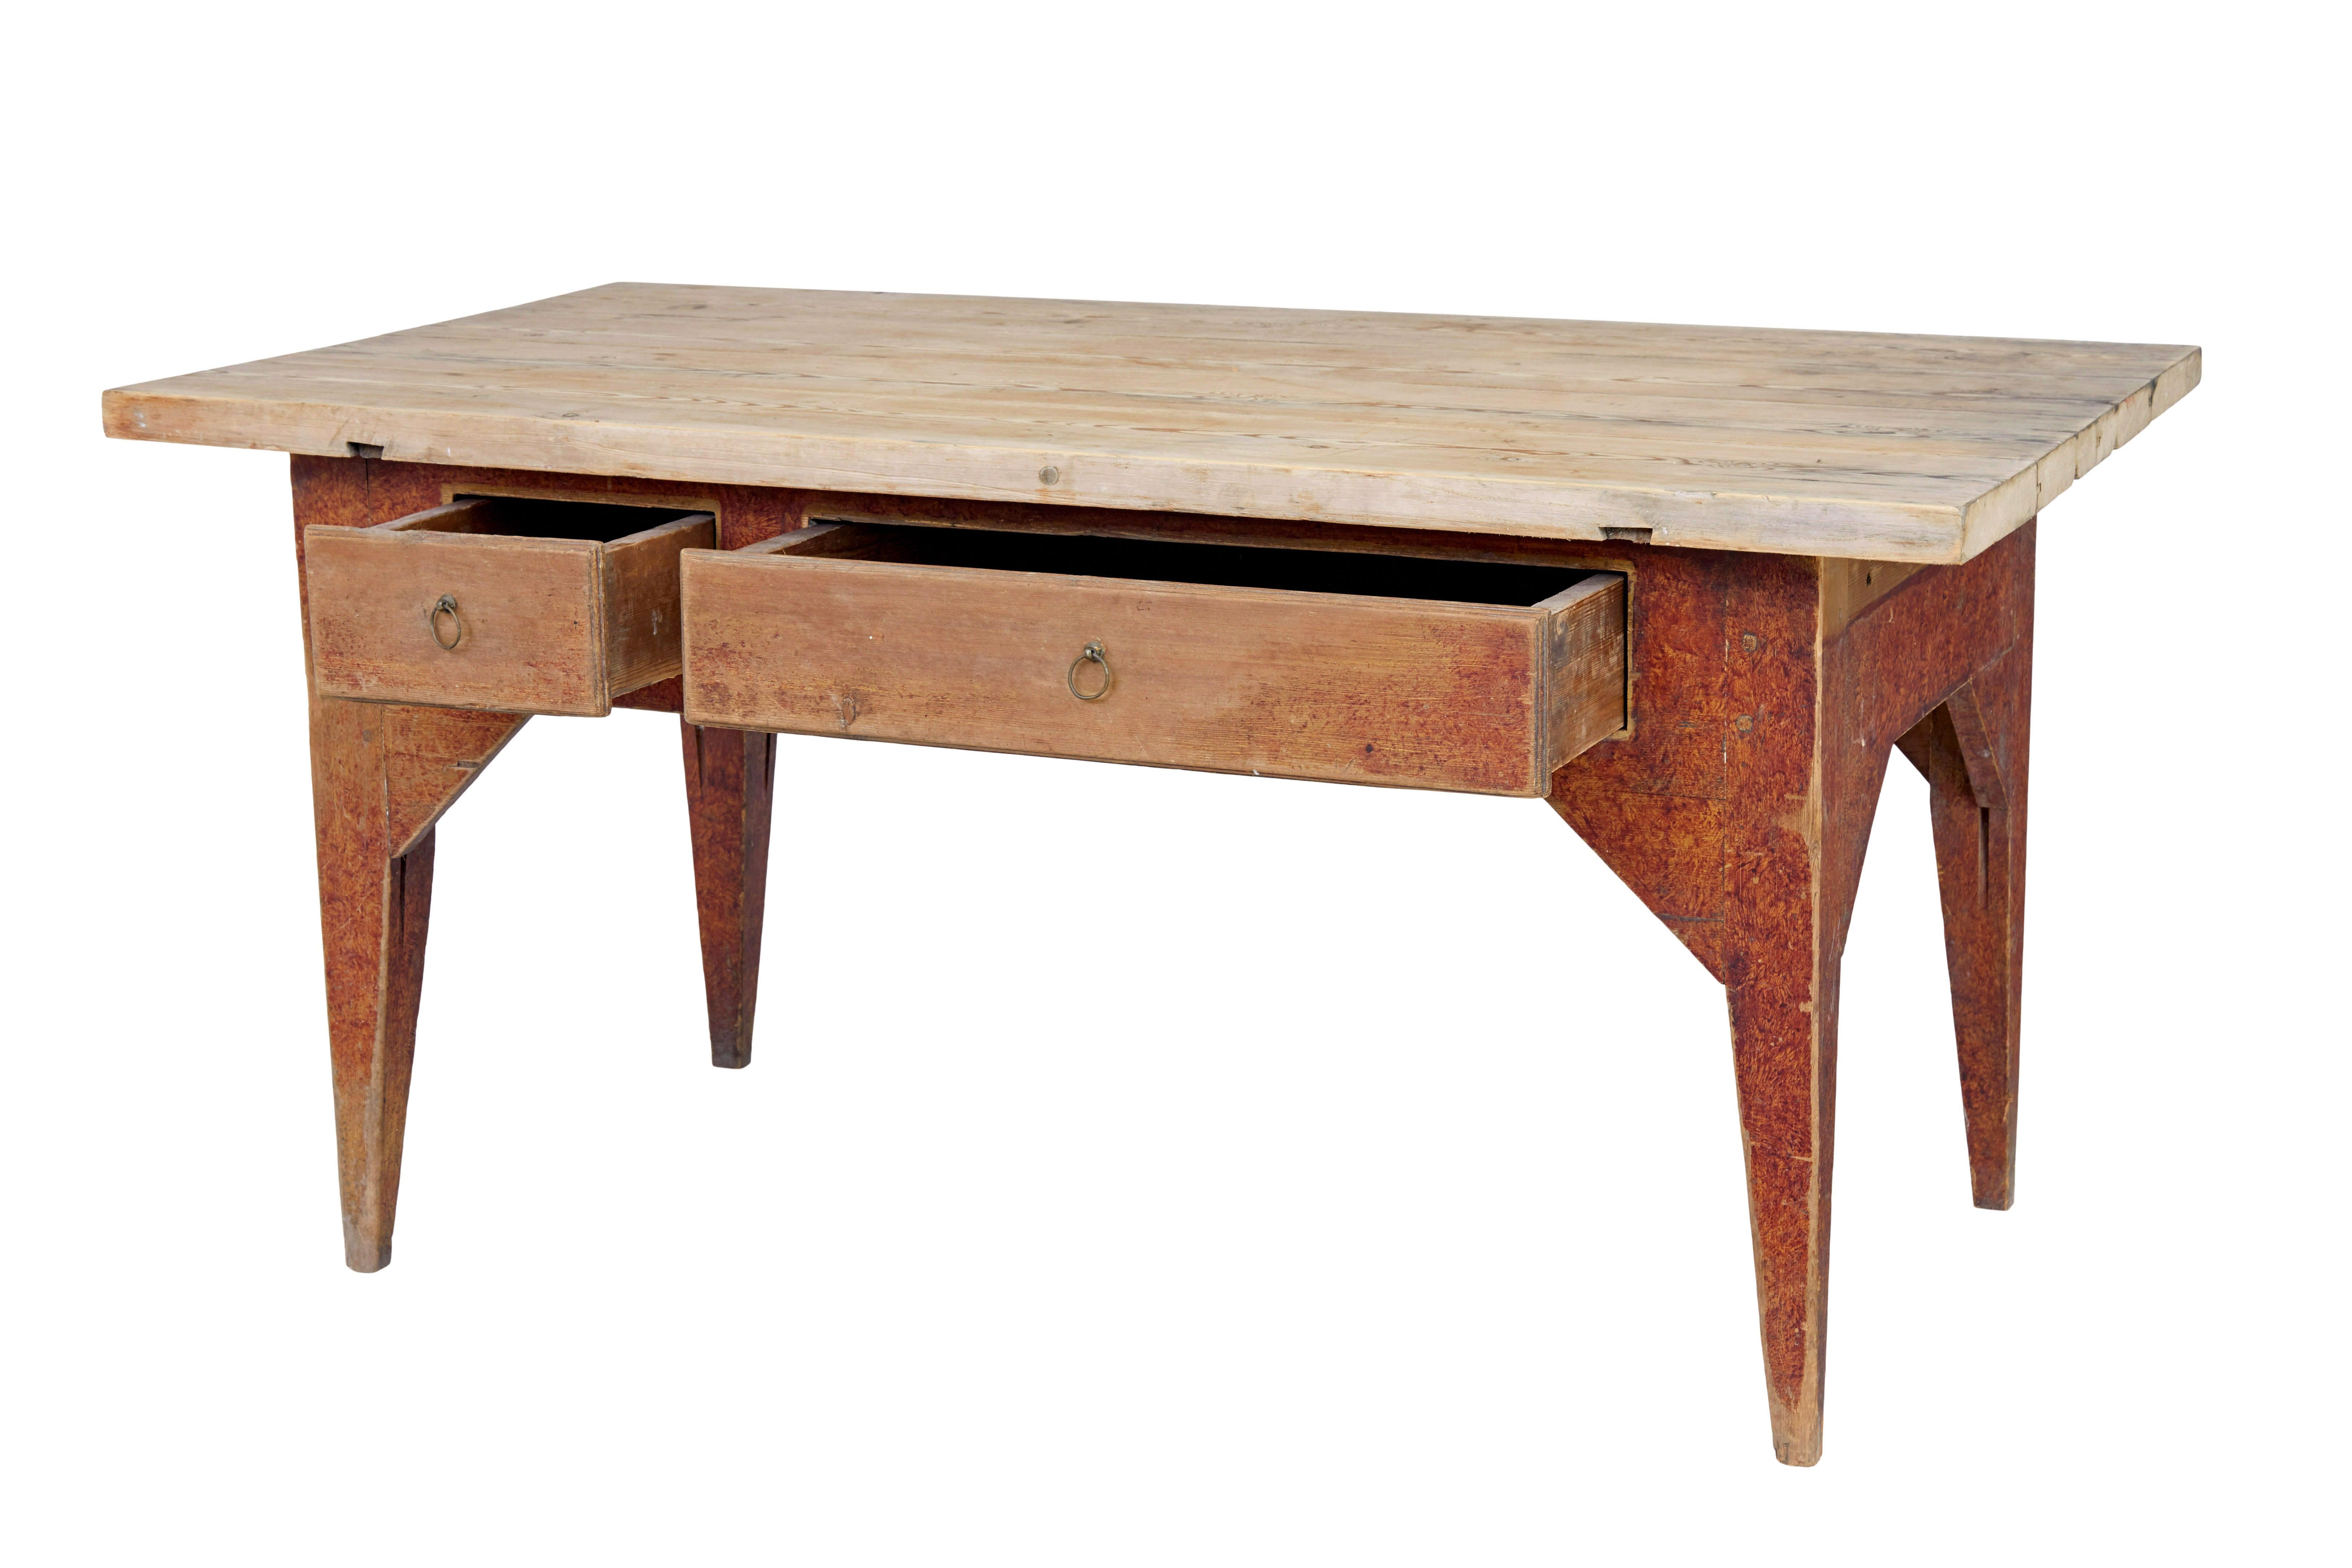 Rustic Mid 19th Century rustic painted pine kitchen table For Sale